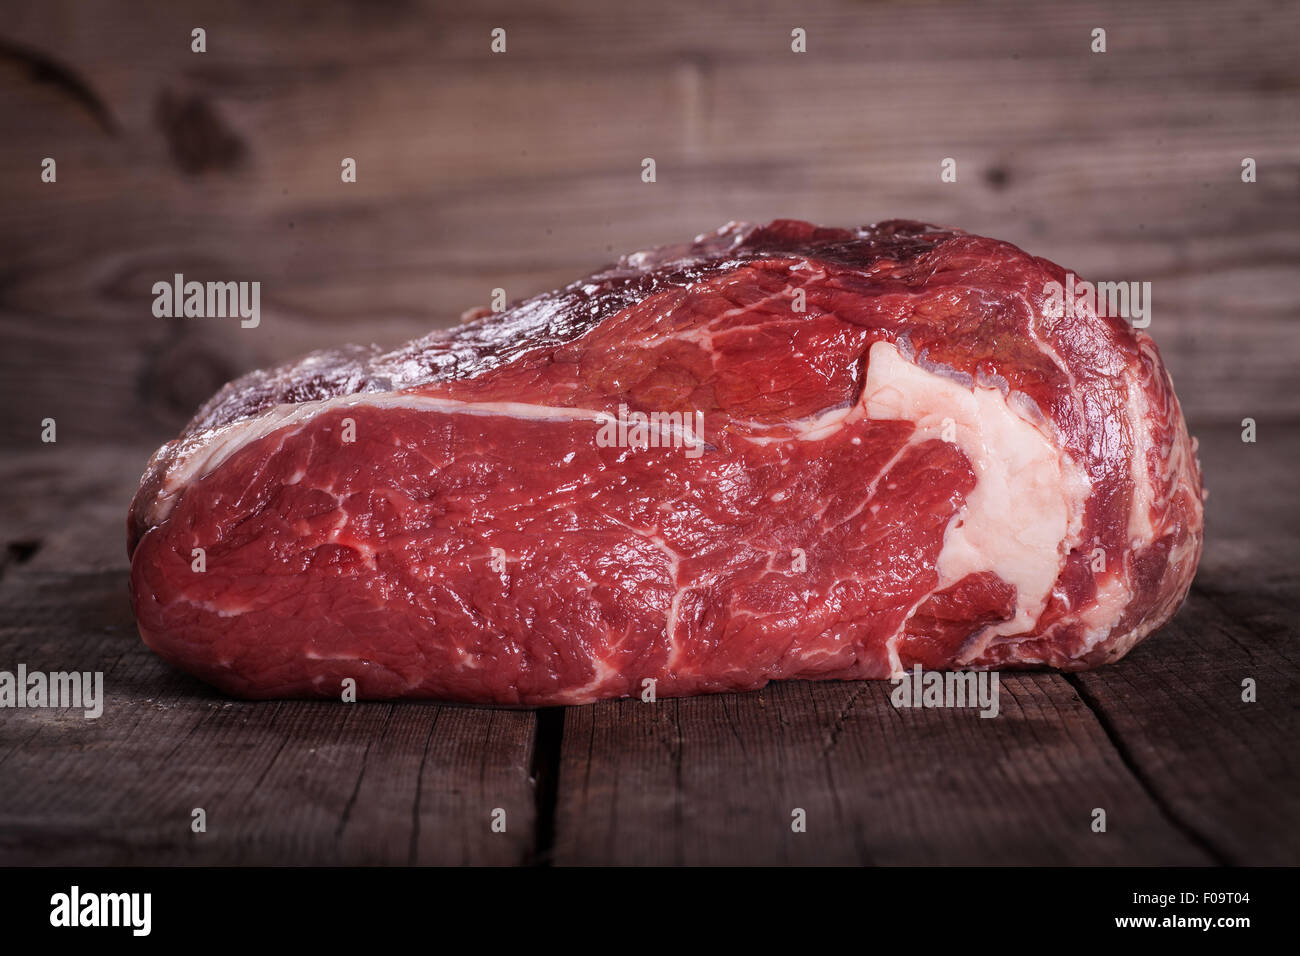 Beef on wooden table over wooden background Stock Photo